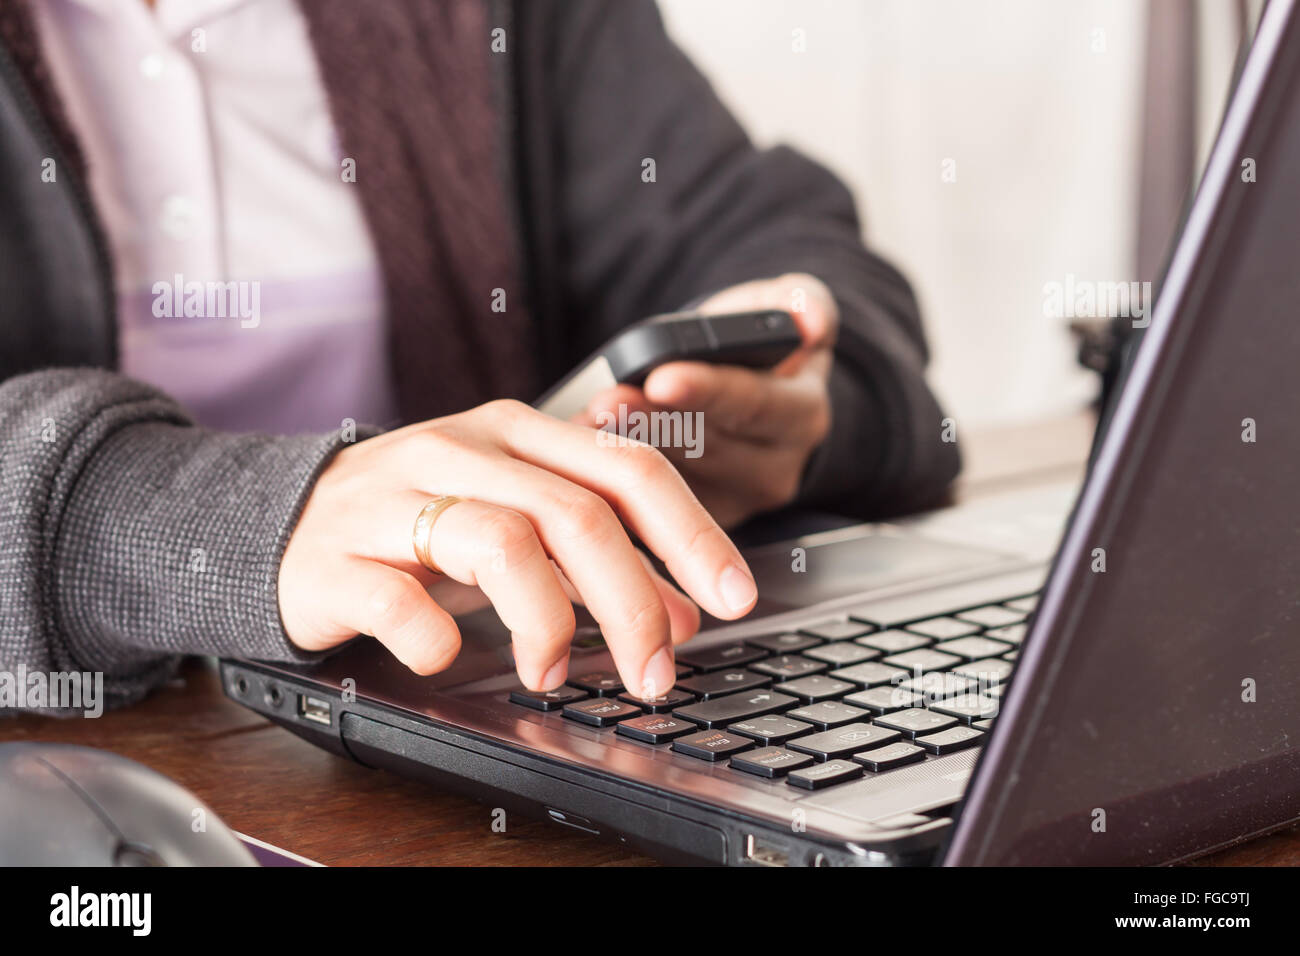 Woman using smart phone at office desk, stock photo Stock Photo